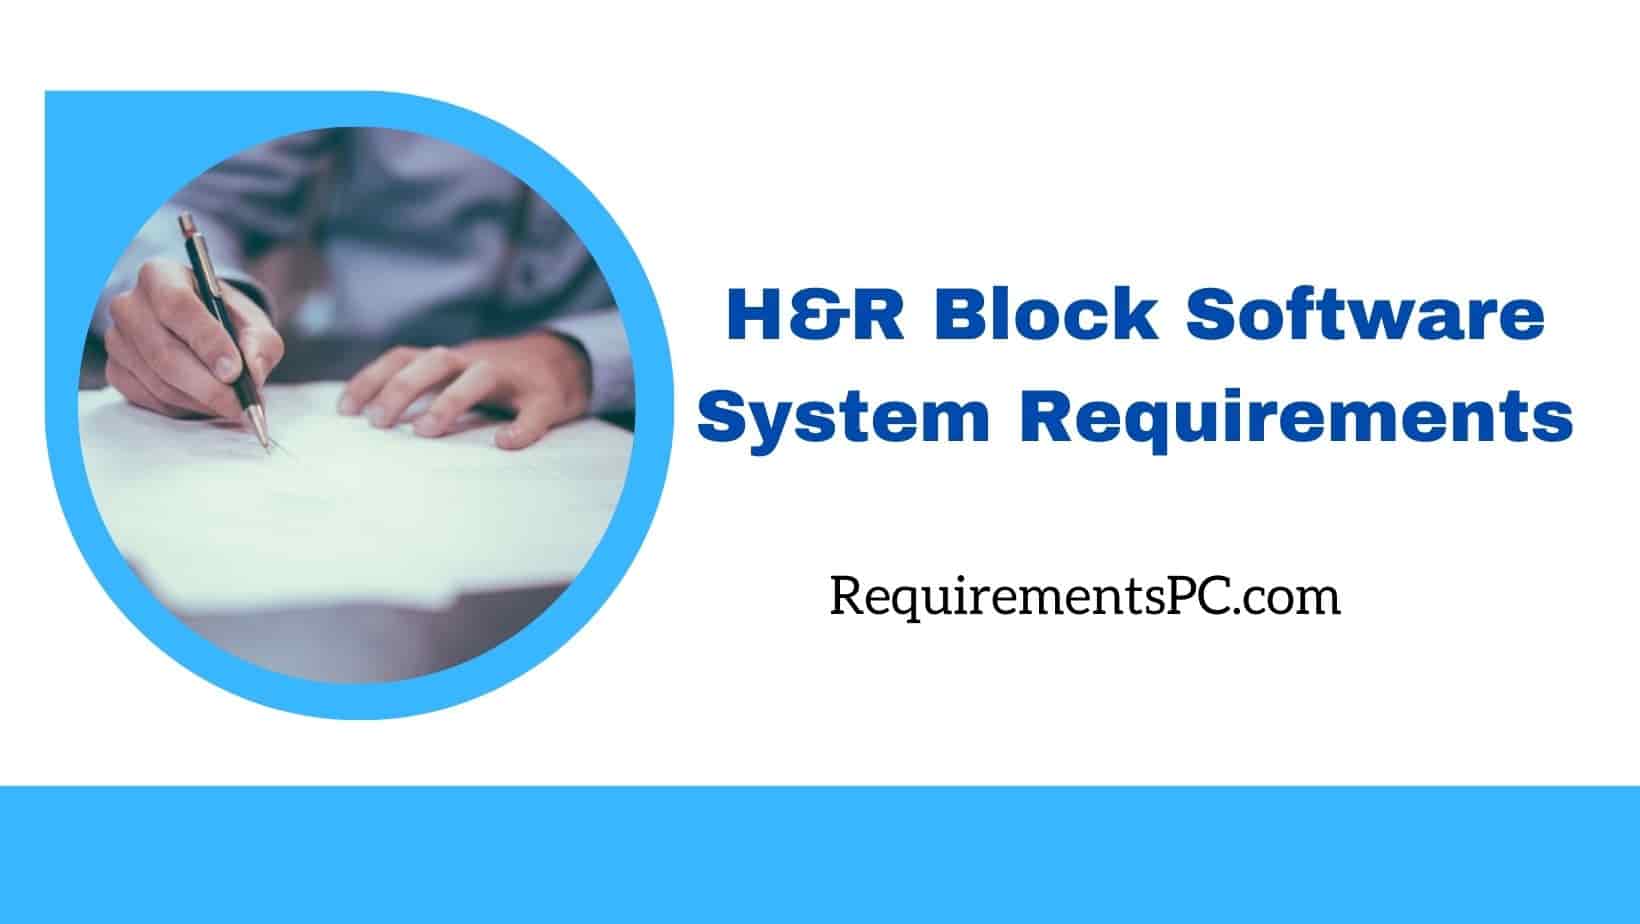 You are currently viewing H&R Block Software System Requirements